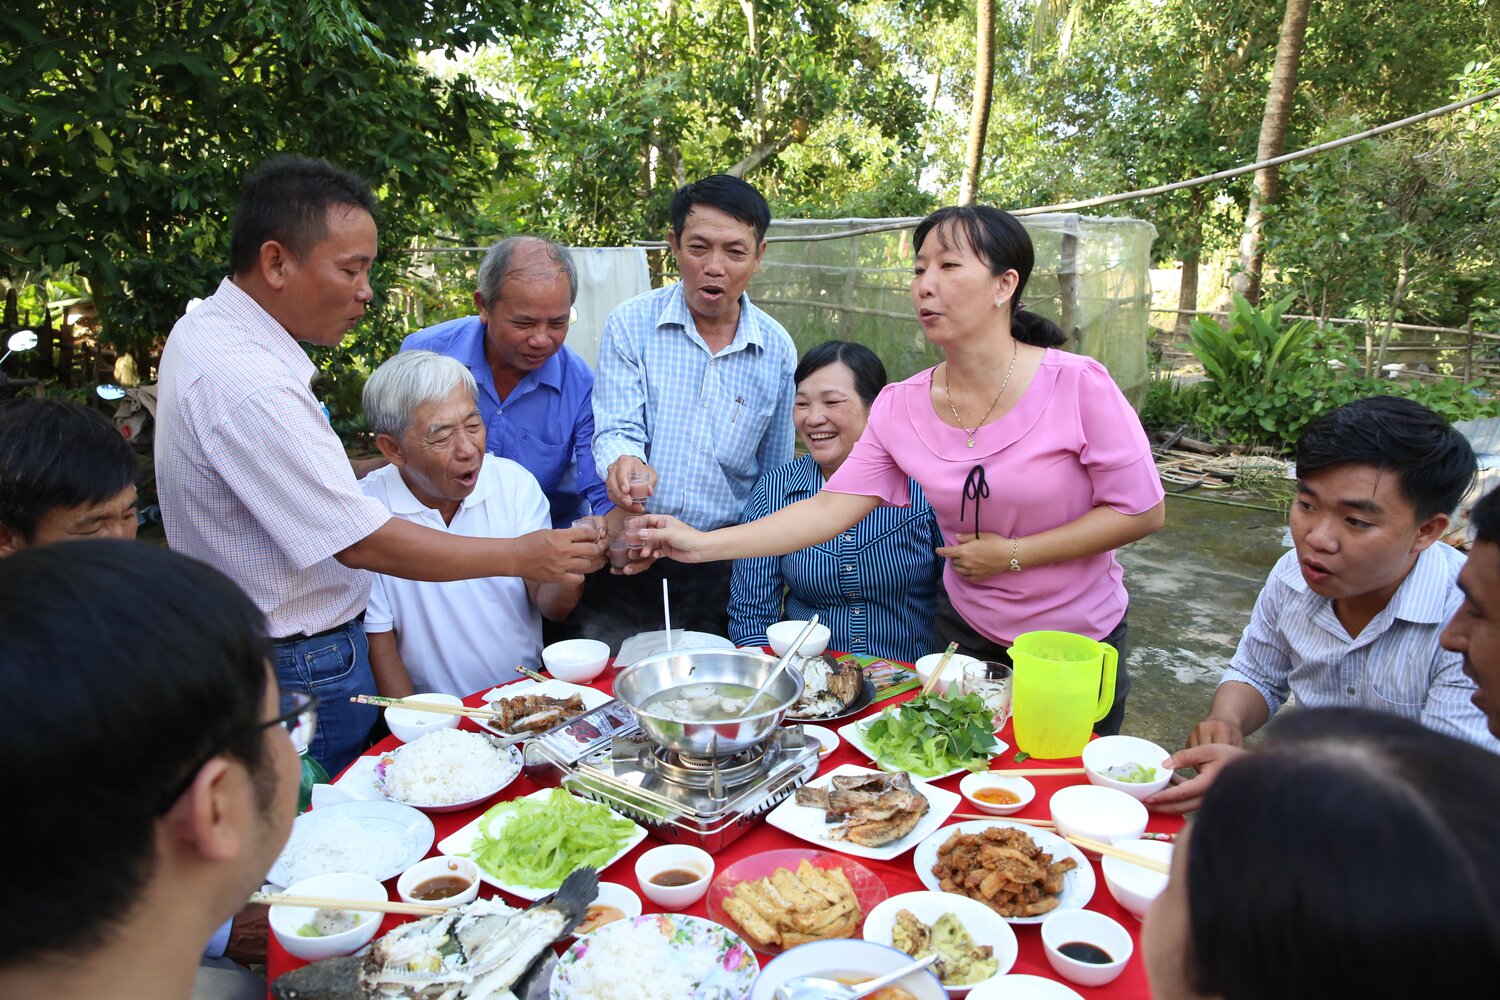 A toast with rice wine! To new friends and collaborators, and to what farmers in the Mekong Delta hope will soon be new rice varieties that have a little wild in them. This scene, shot at the end of our first day in Vietnam, captures a little of the joy and generosity (and delicious food!) of all those who welcomed the Crop Wild Relatives Project guests to the region. Photo: L.M. Salazar